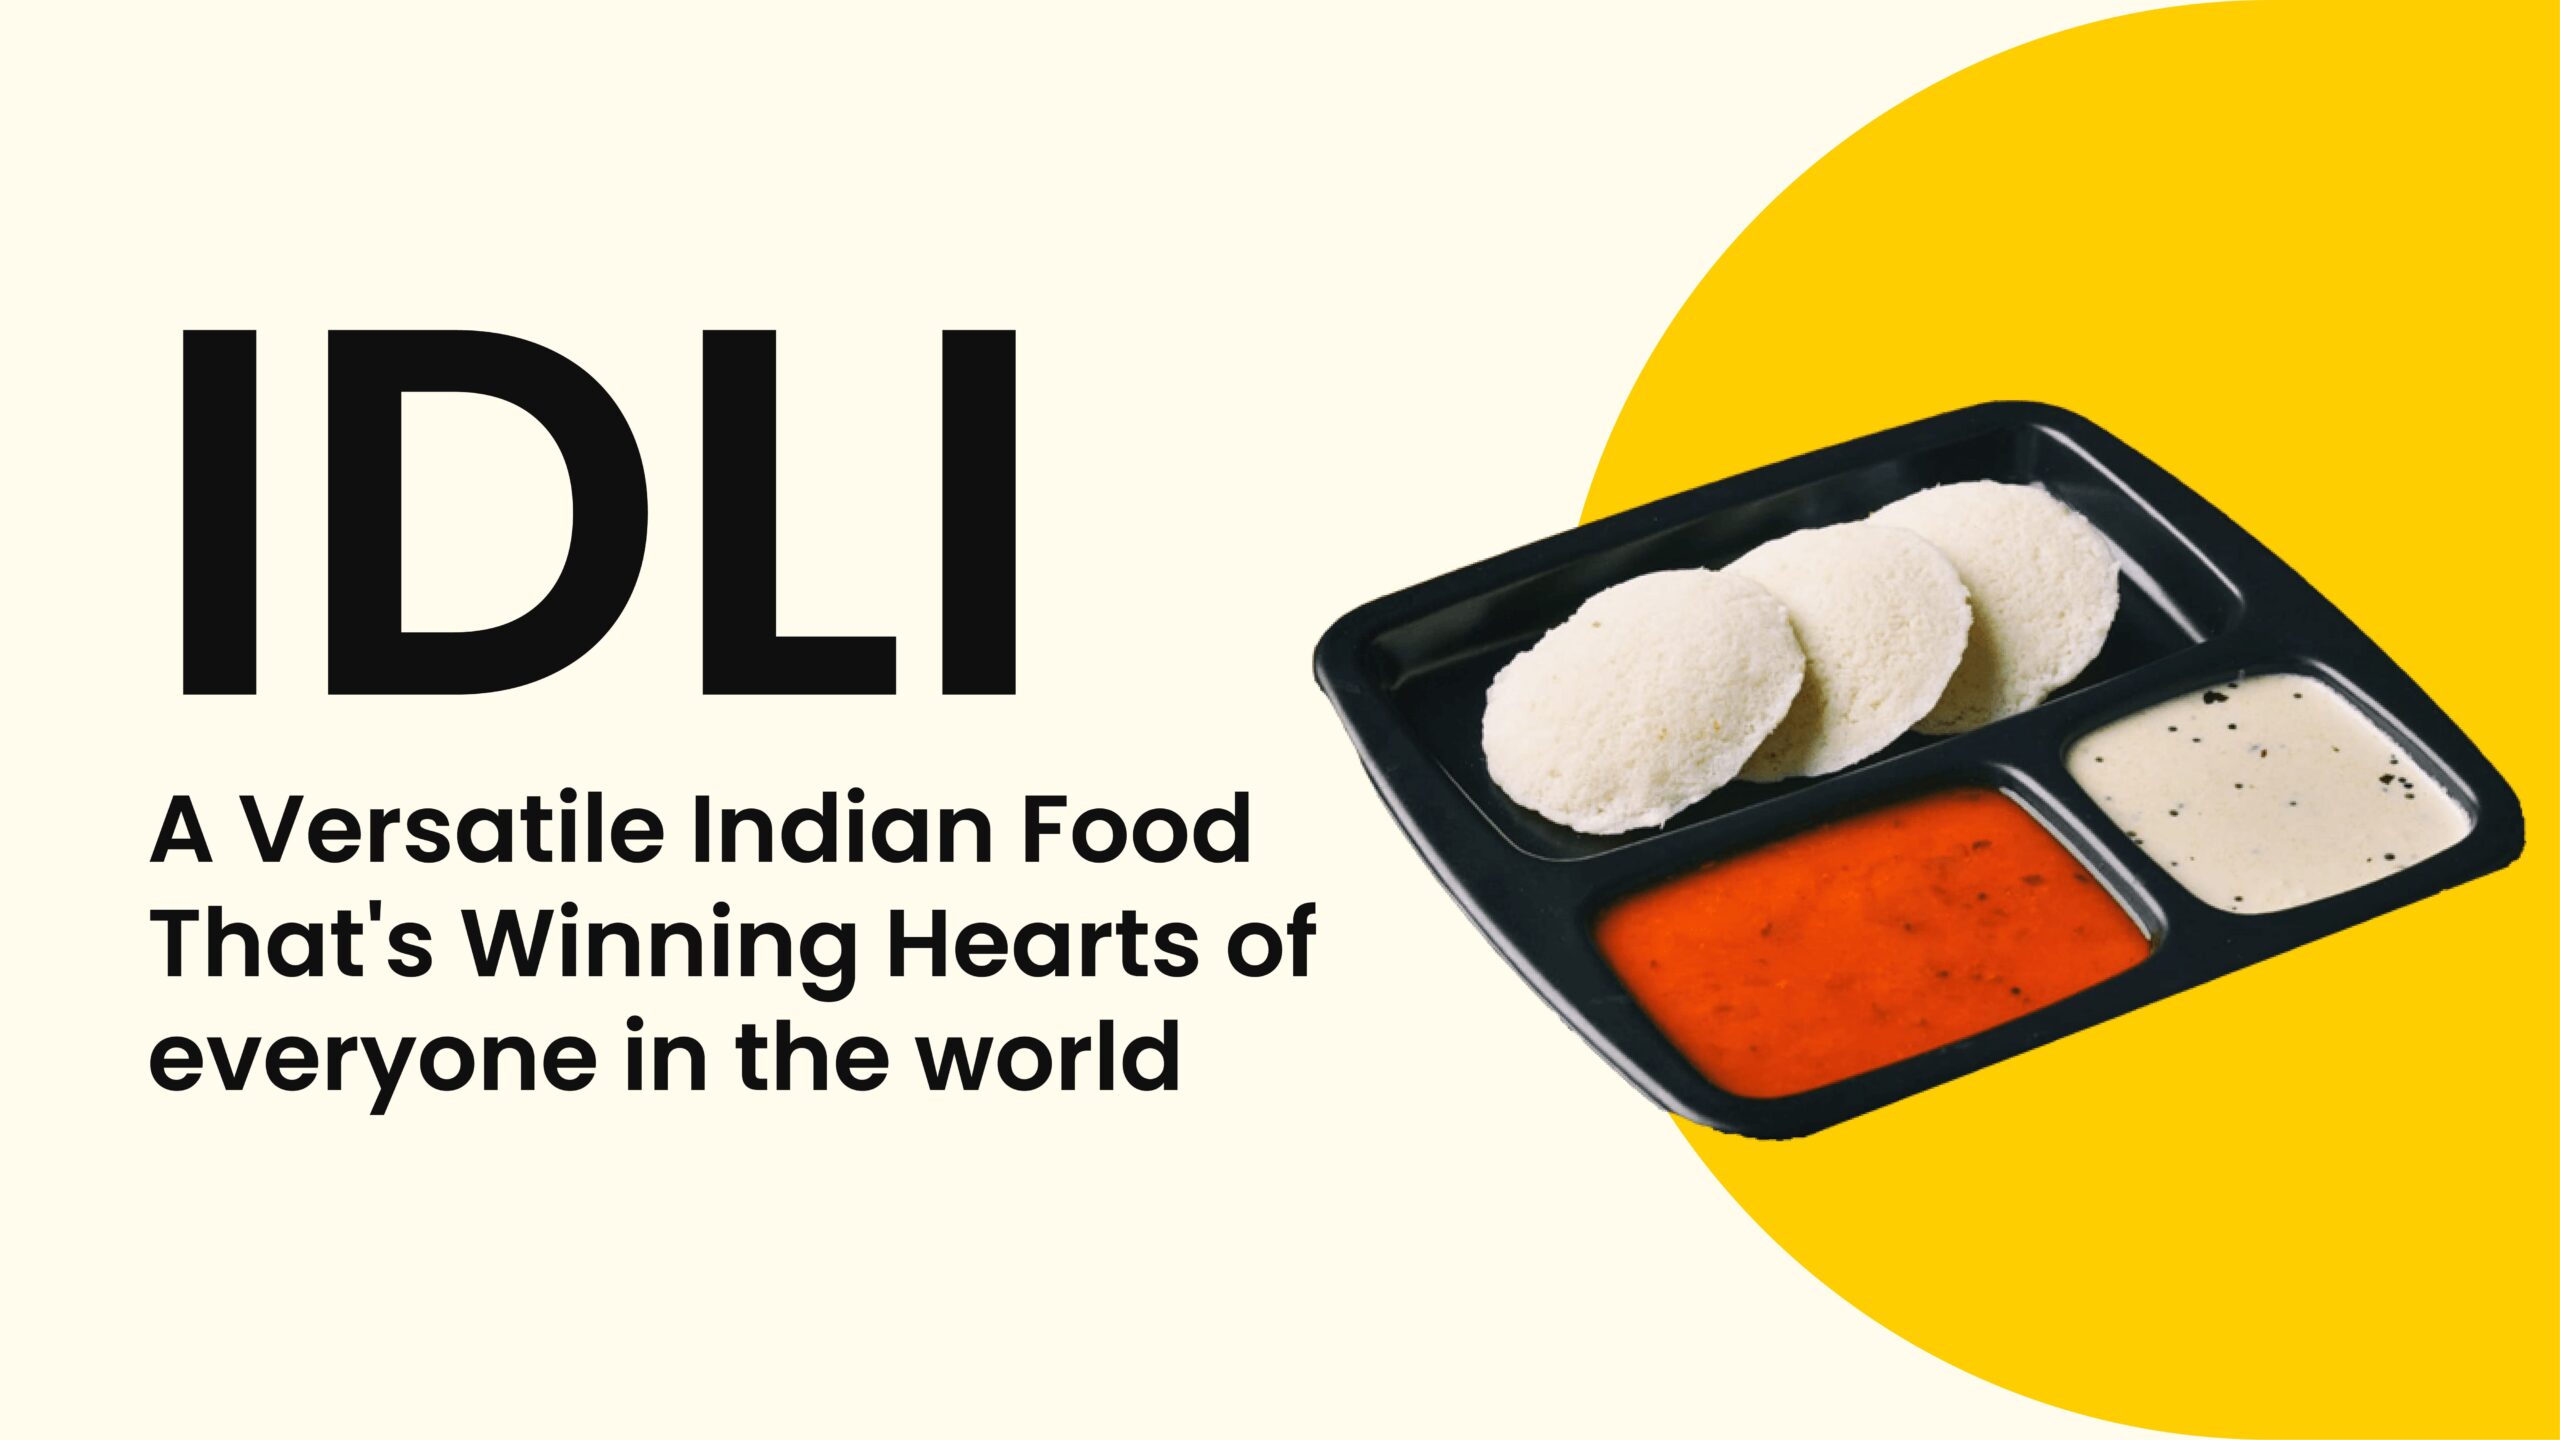 IDLI – A Versatile Indian Food That’s Winning Hearts of everyone in the world